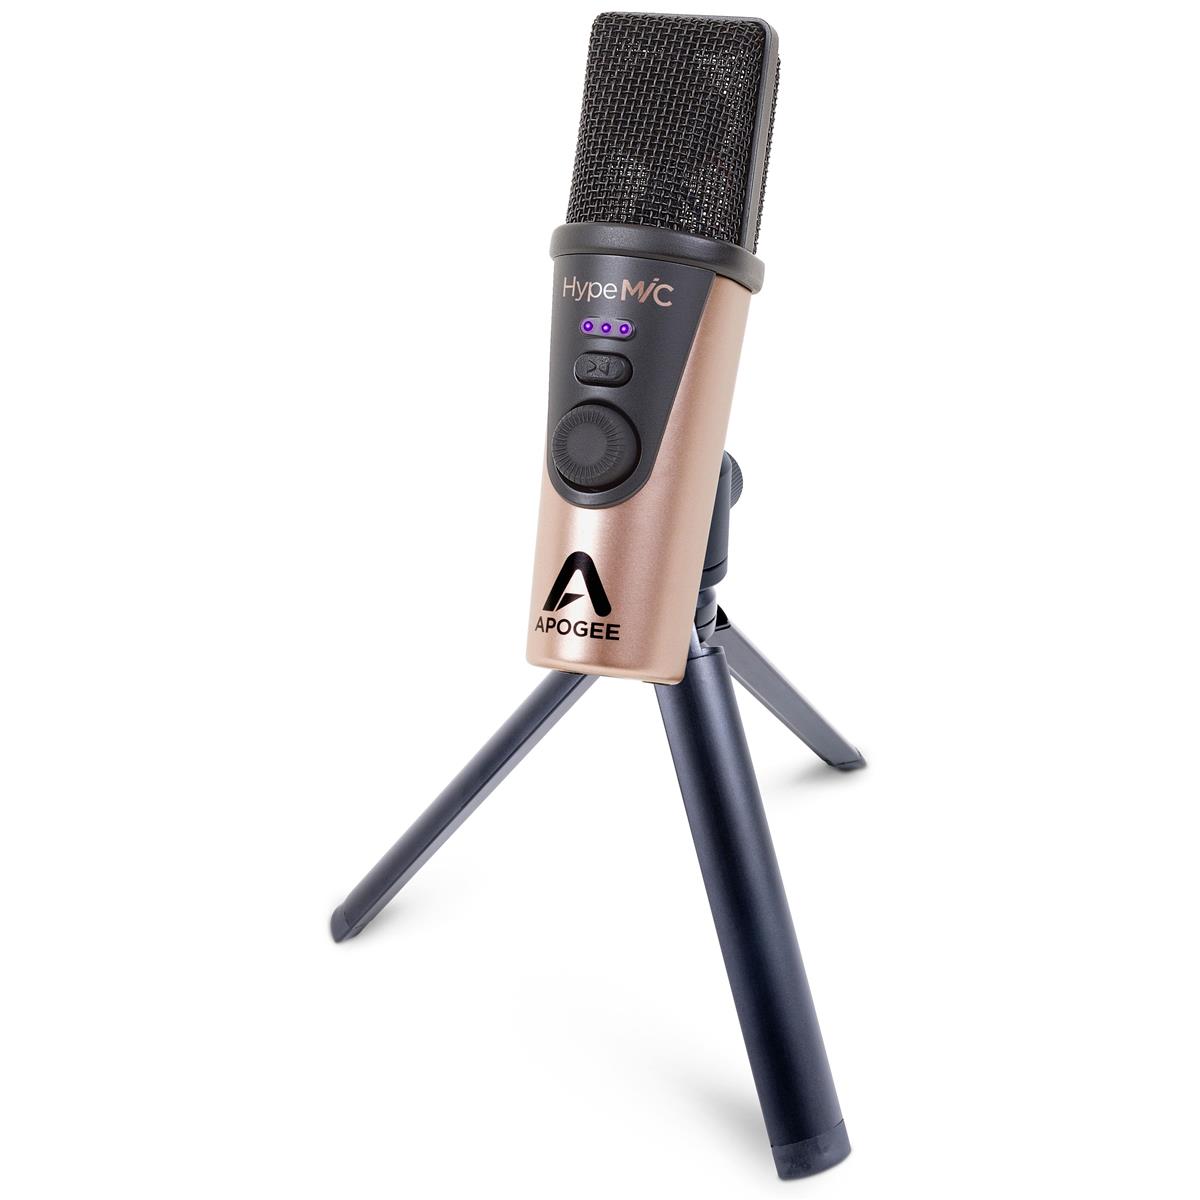 Image of Apogee Electronics HypeMiC USB Cardioid Condenser Microphone